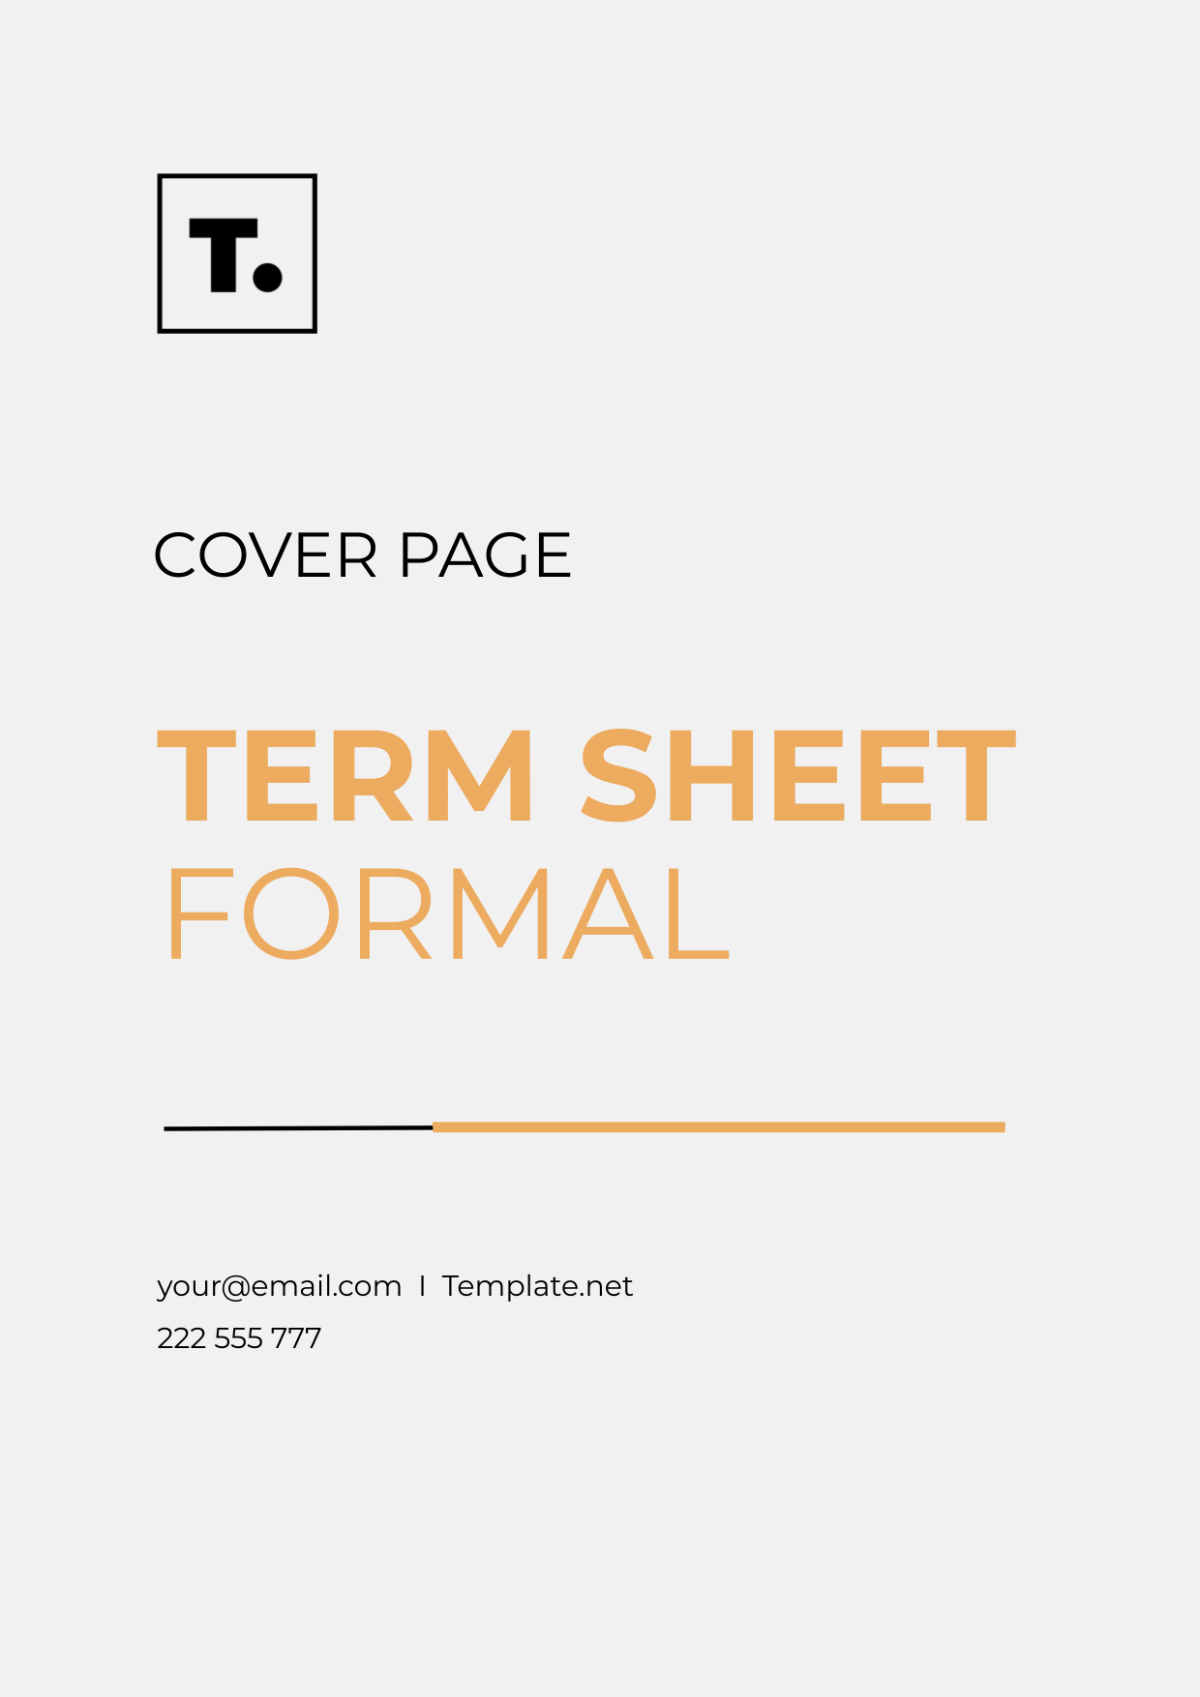 Term Sheet Formal Cover Page